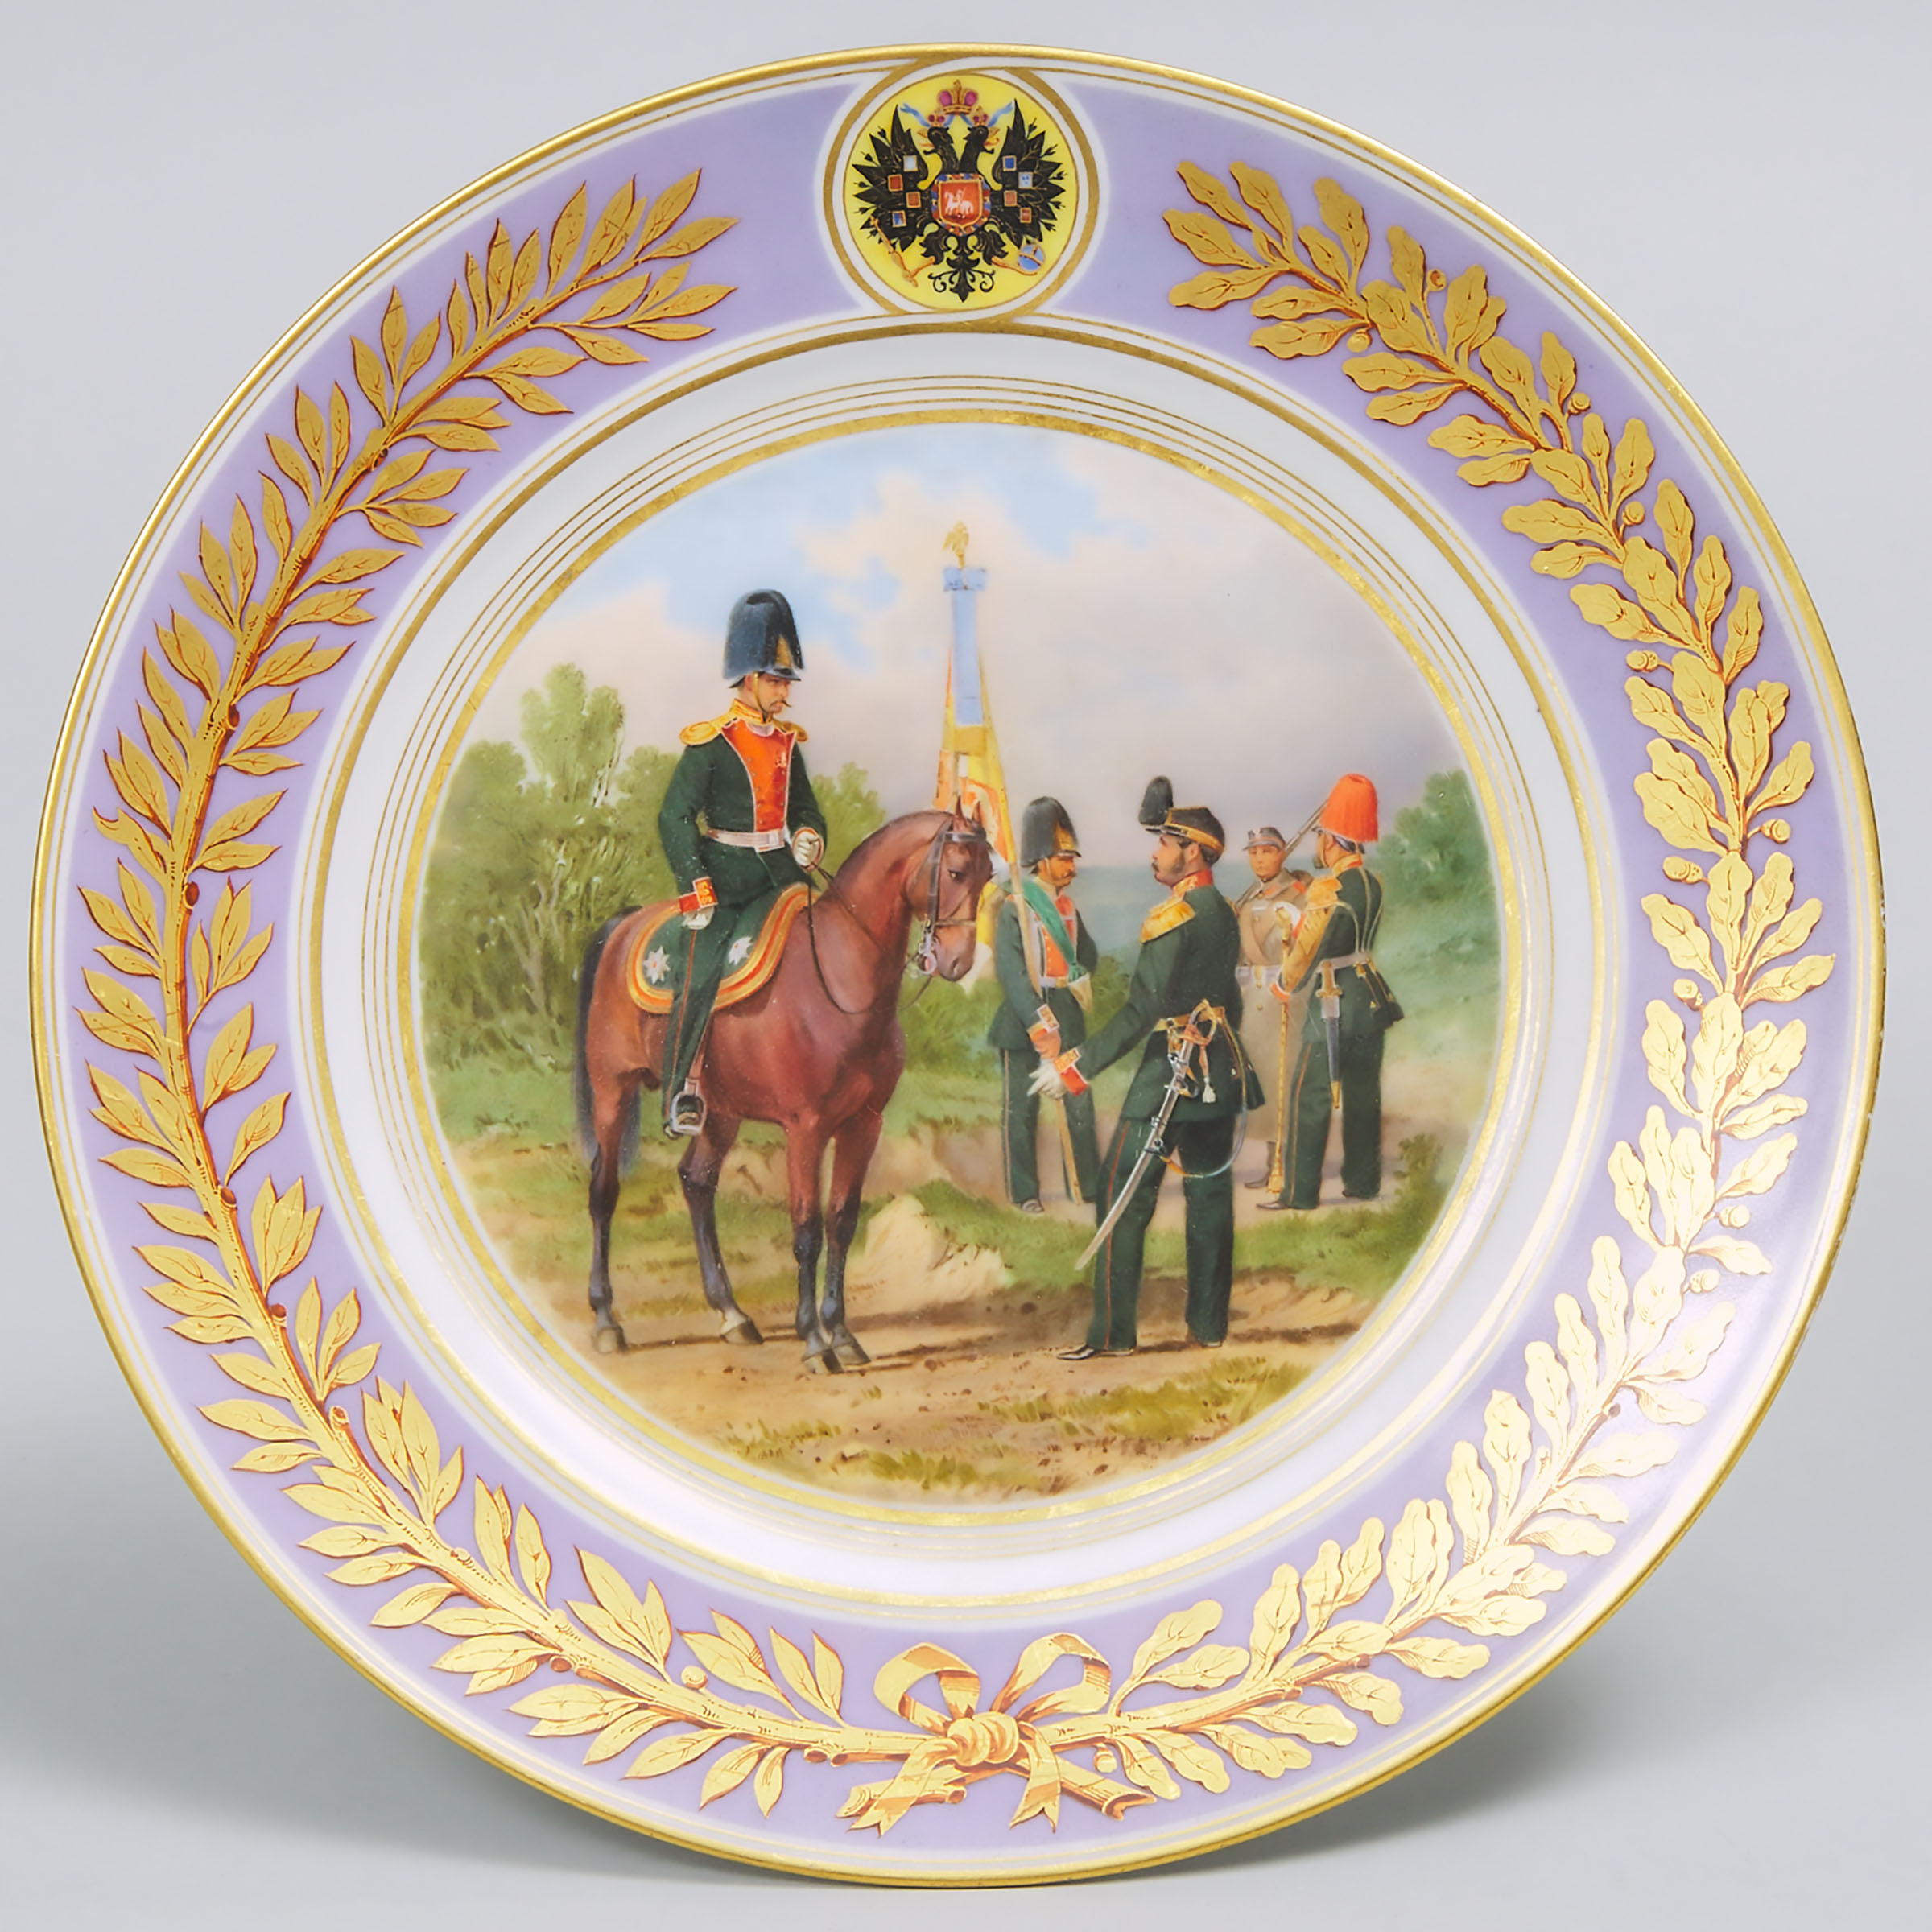 Russian Imperial Porcelain Factory Military Plate, period of Alexander II, 1855-81